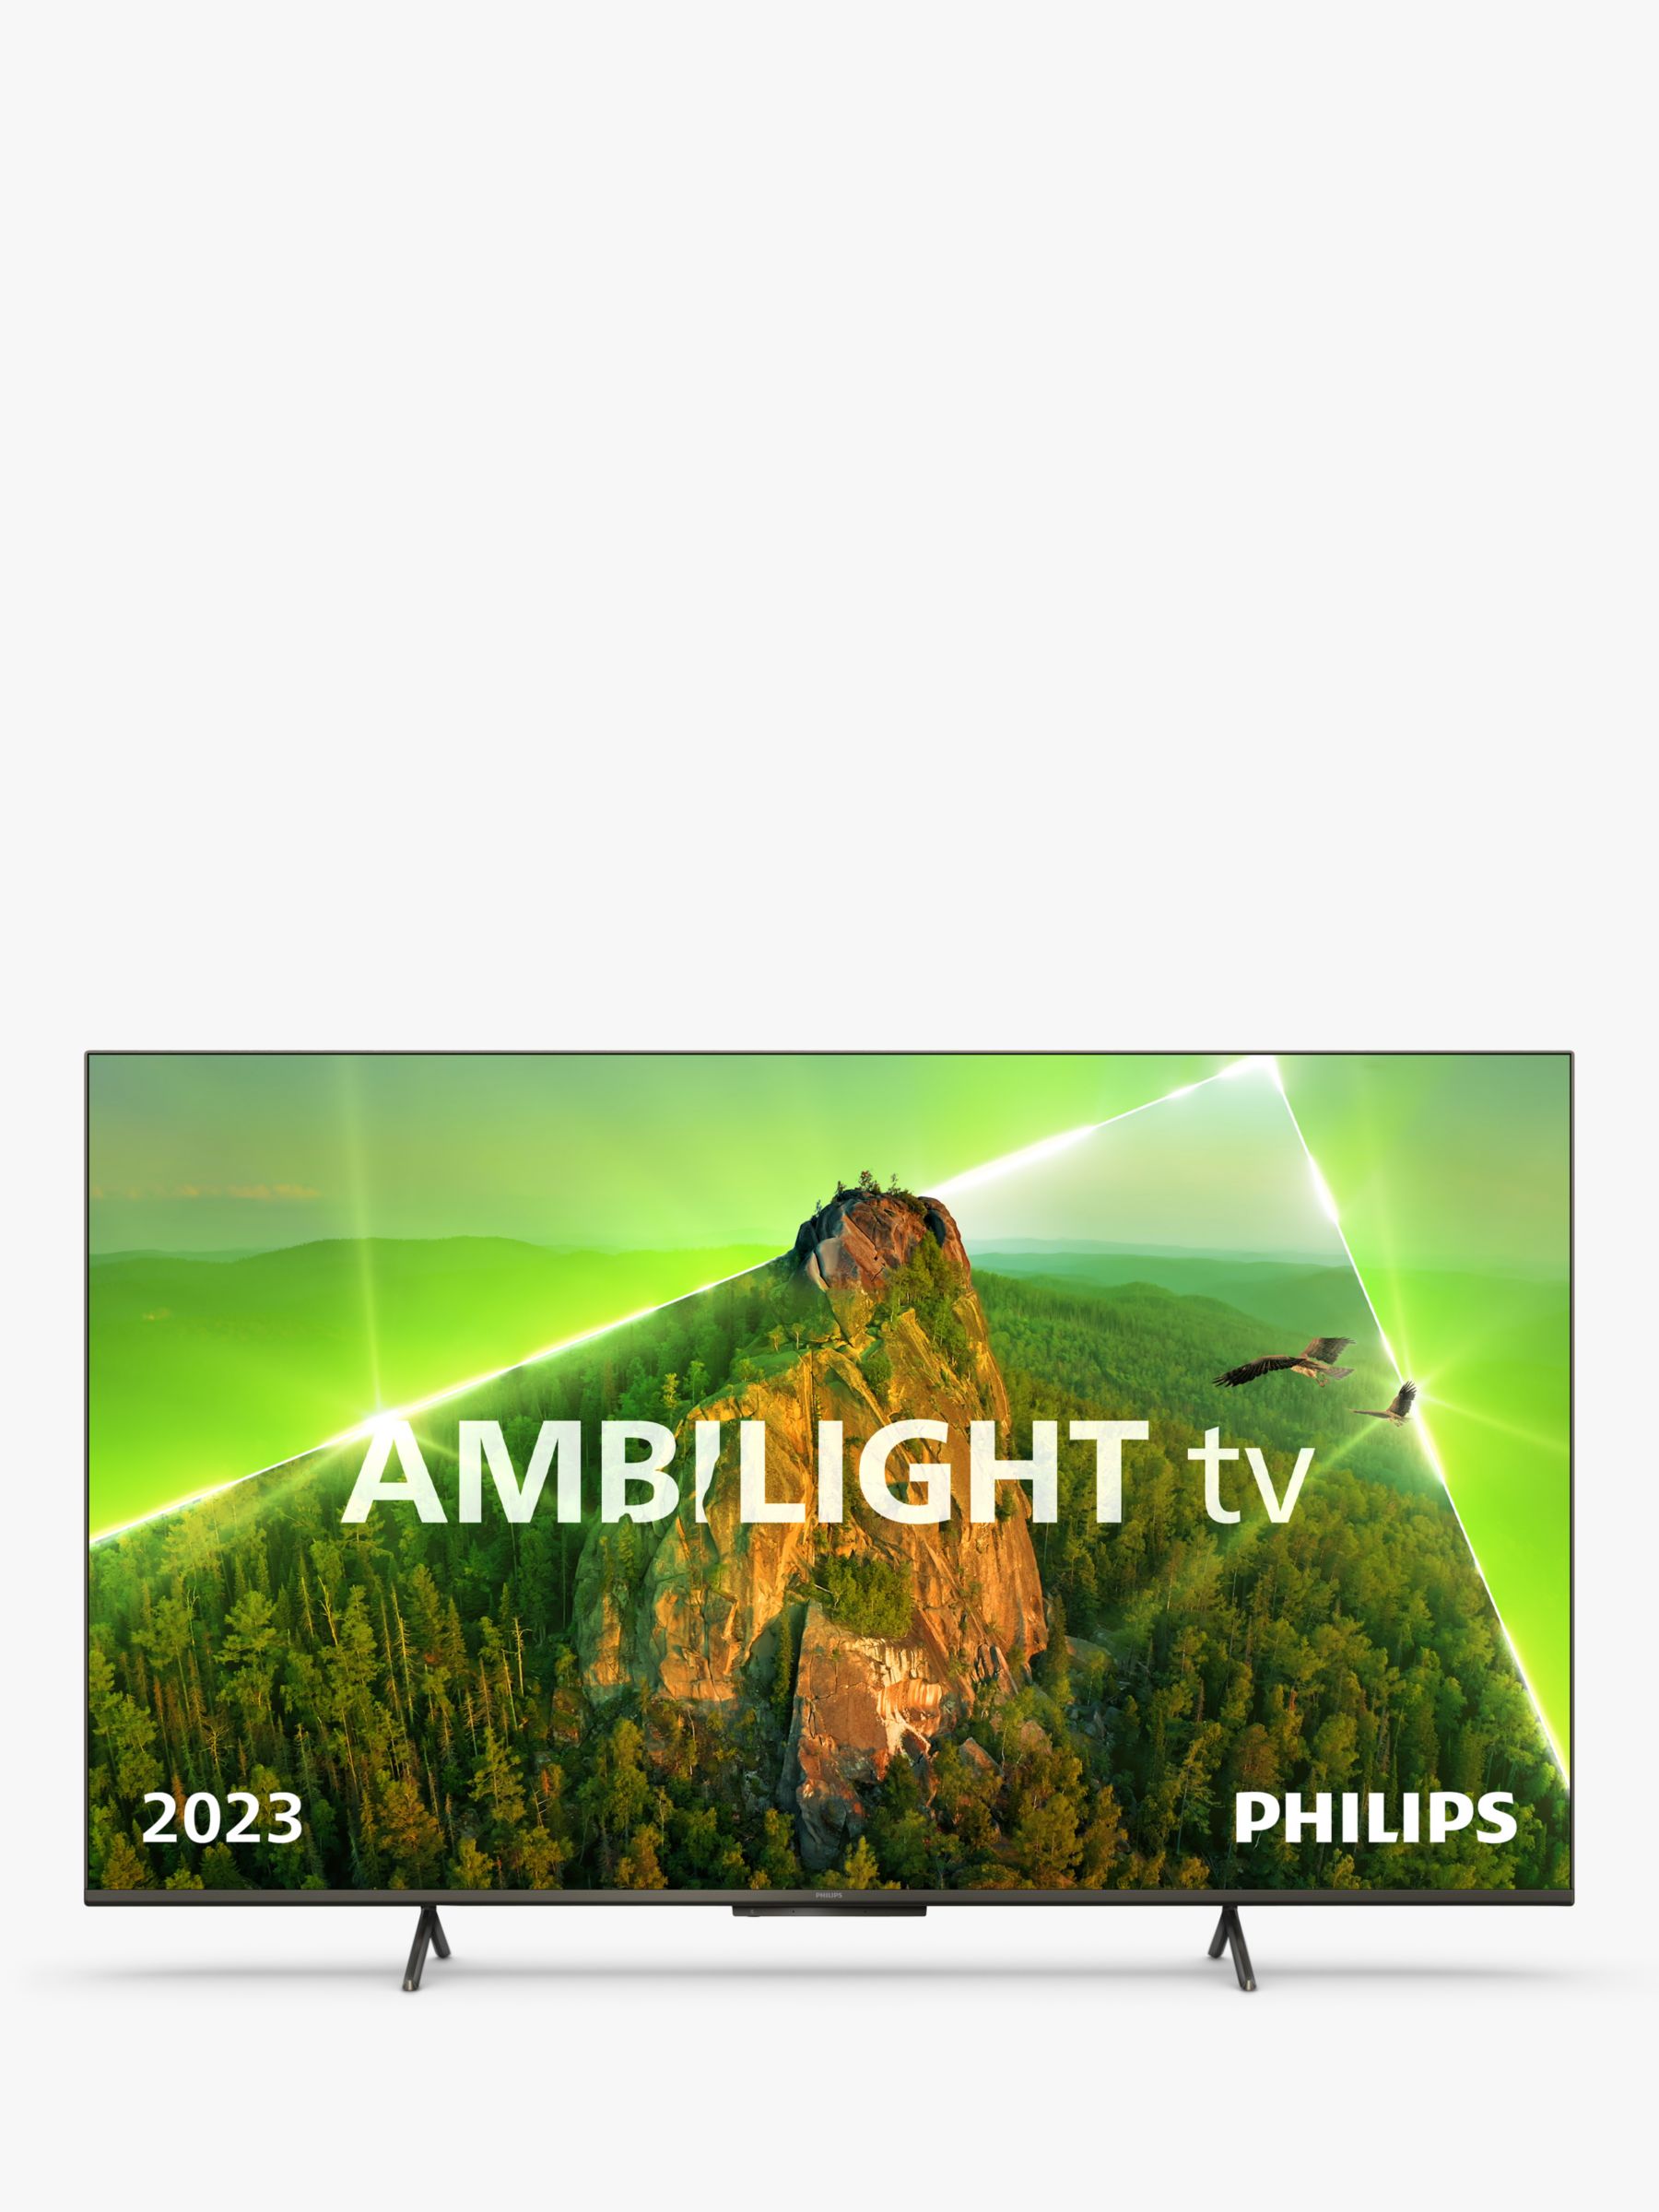 Philips 43PUS8108 (2023) LED HDR 4K Ultra HD Smart TV, 43 inch